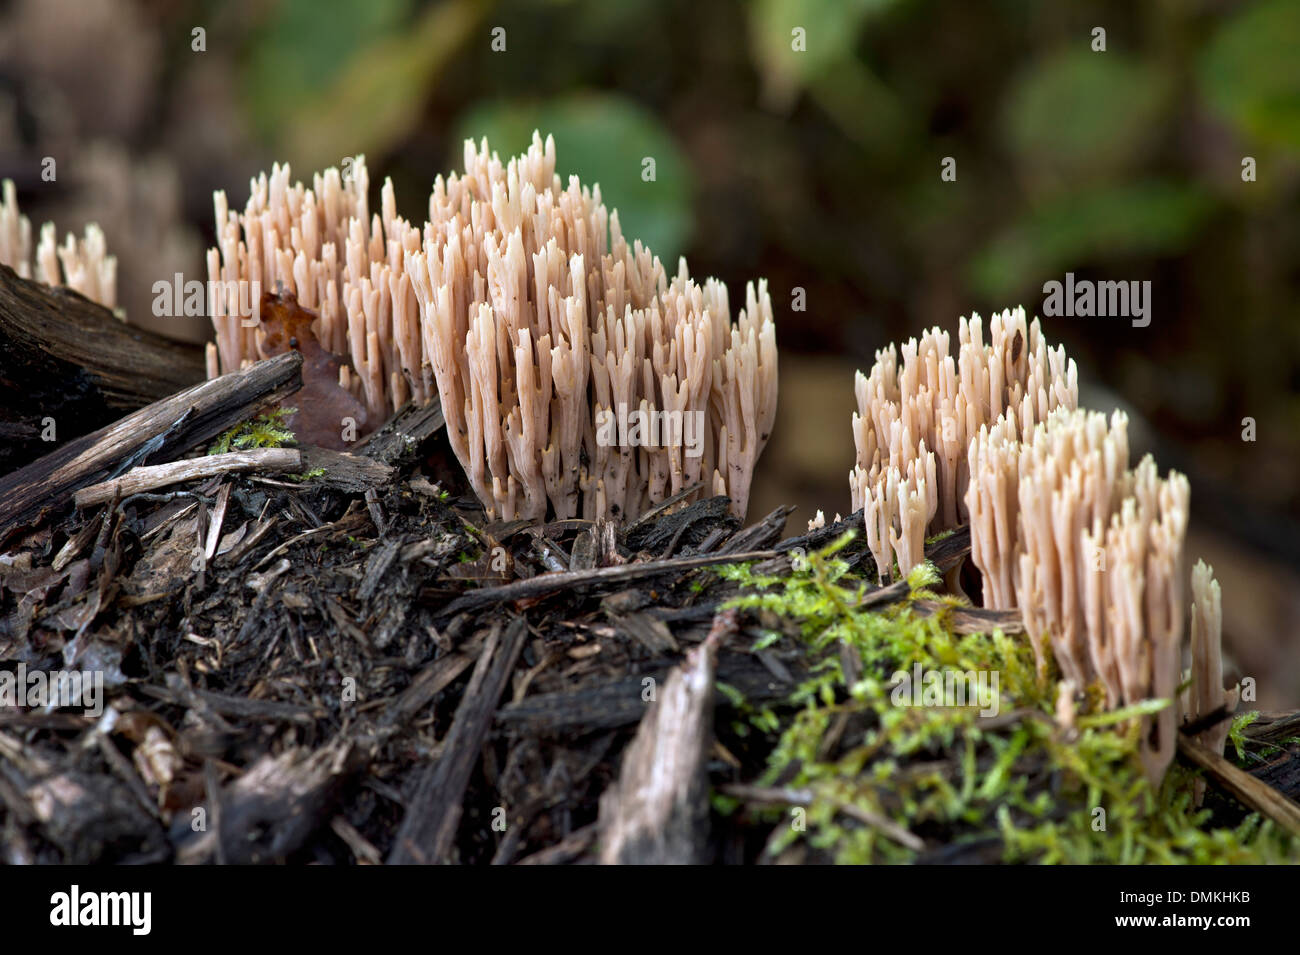 Strict-branch coral fungus (Ramaria stricta), inedible, Ramariaceae family,  Switzerland Stock Photo